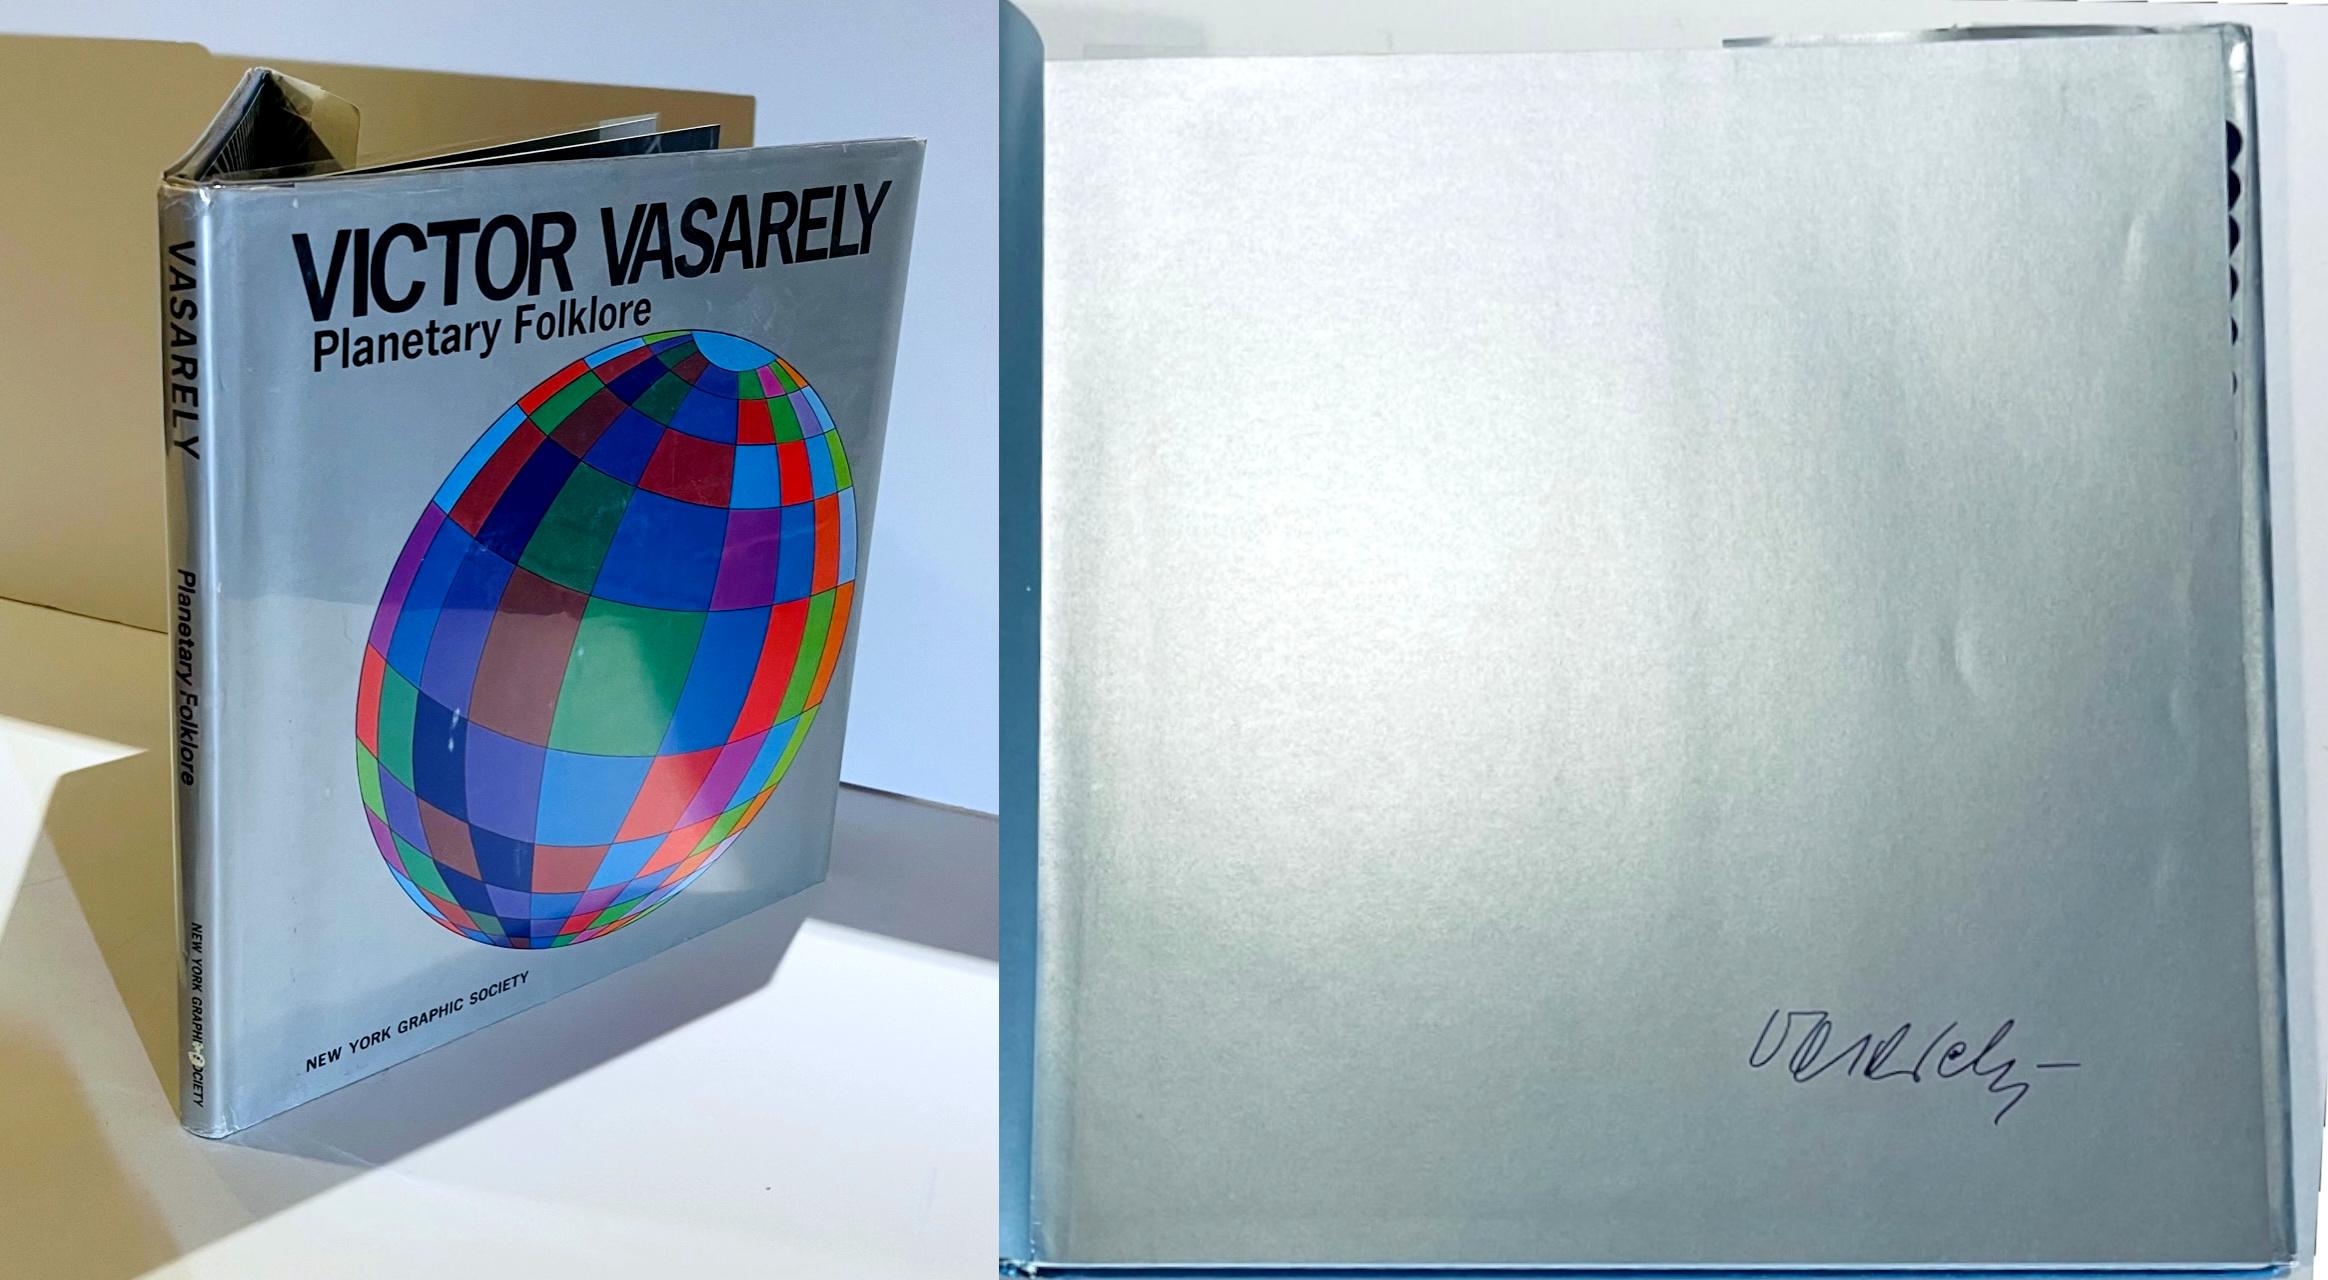 Vintage Hardback Monograph: Planetary Folklore (Hand signed by Victor Vasarely)